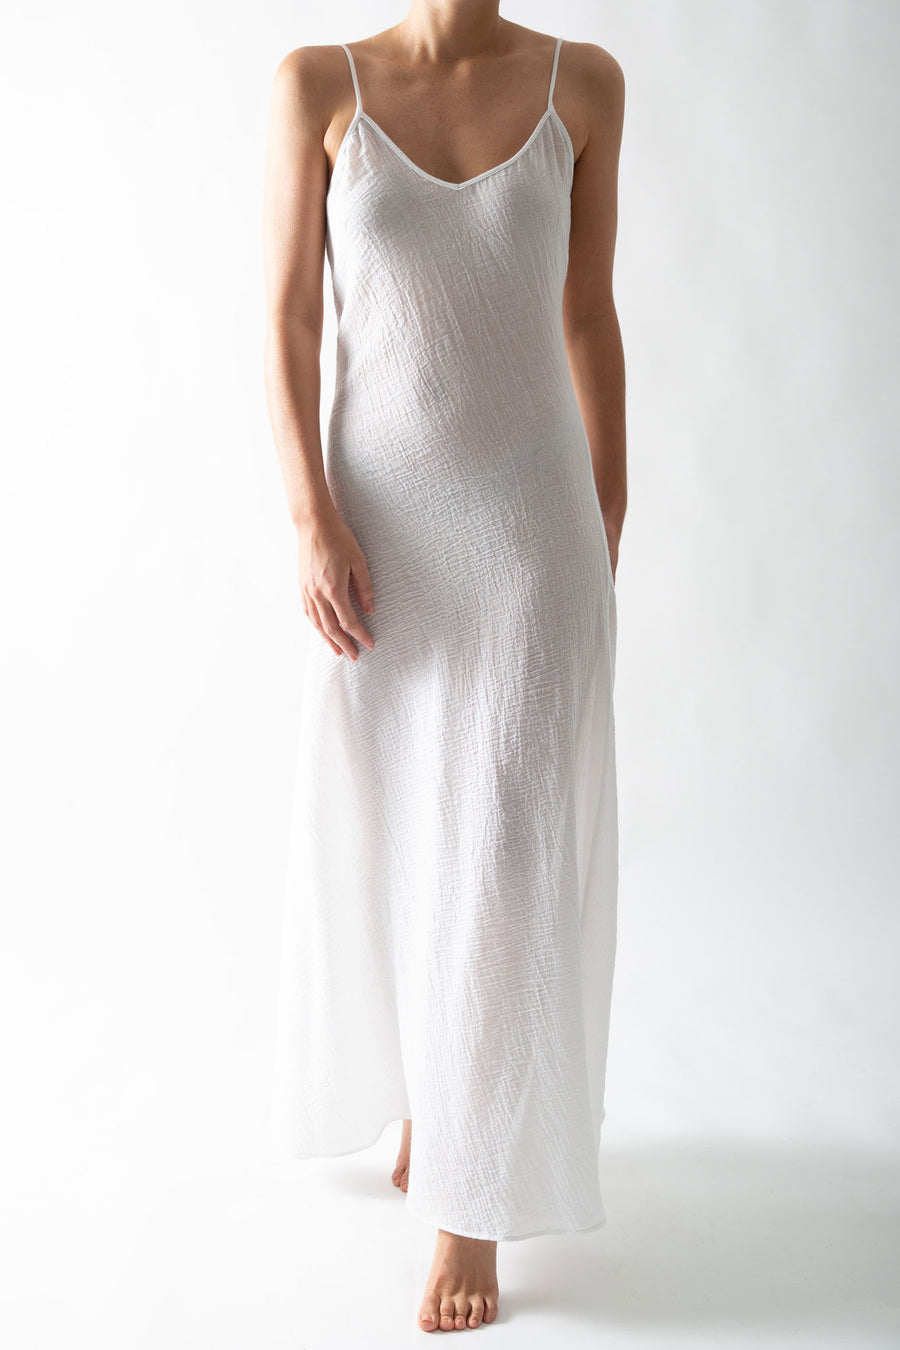 This is a photo of a woman wearing a sheer white slip dress in a cotton gauze material. 